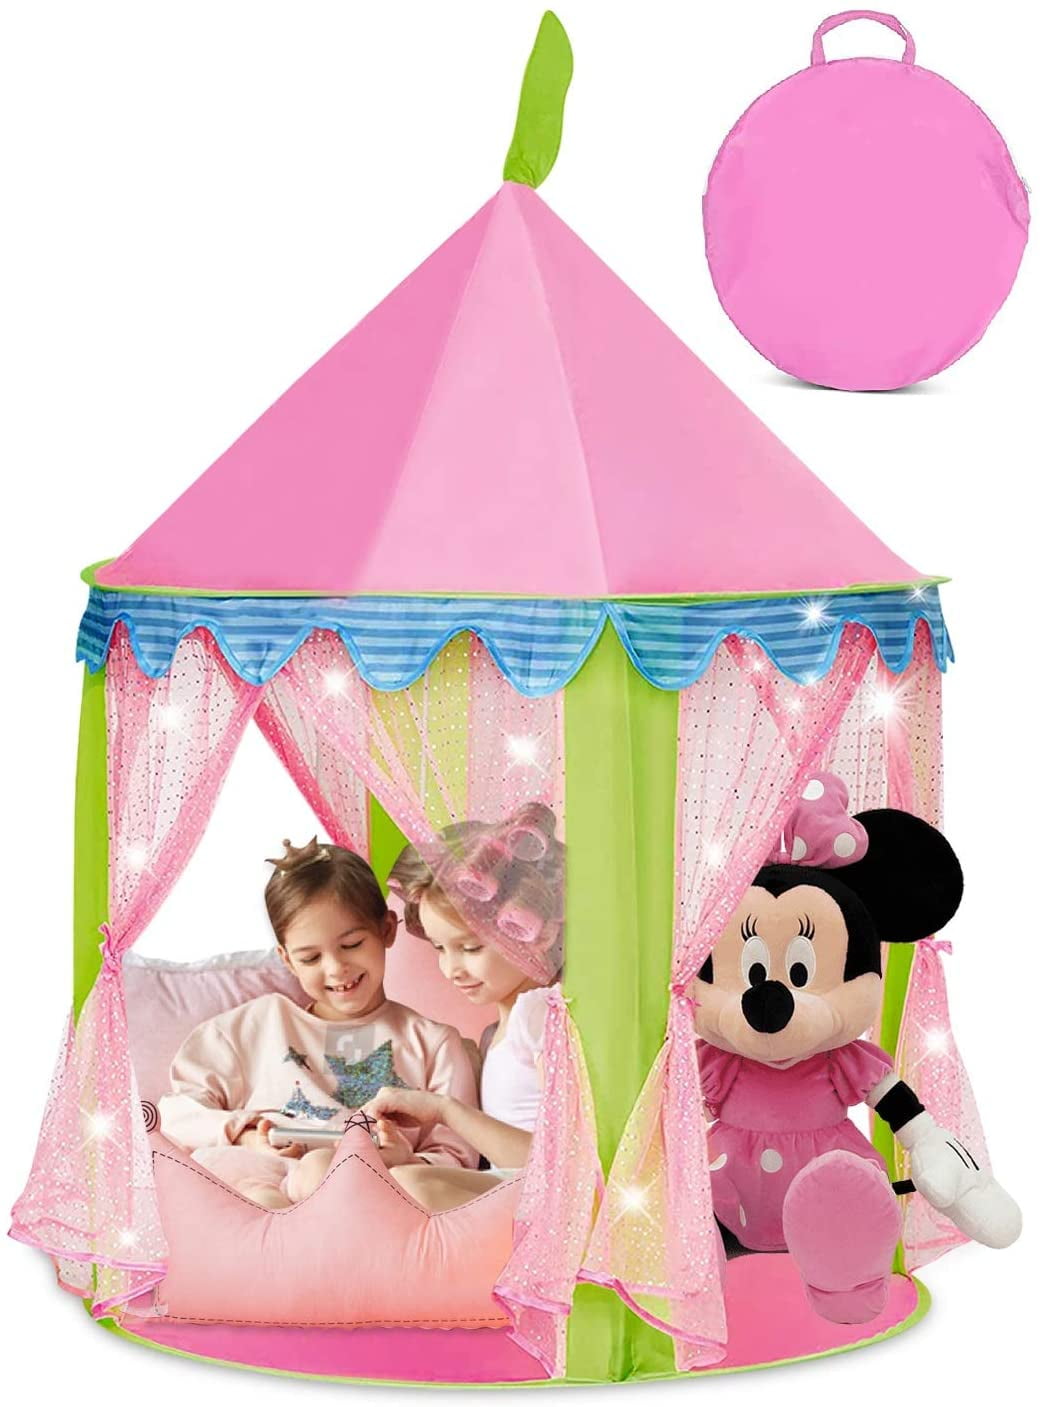 Kids Pop Up Princess Castle Tent Indoor Outdoor Funnny Playhouse Play Toy 